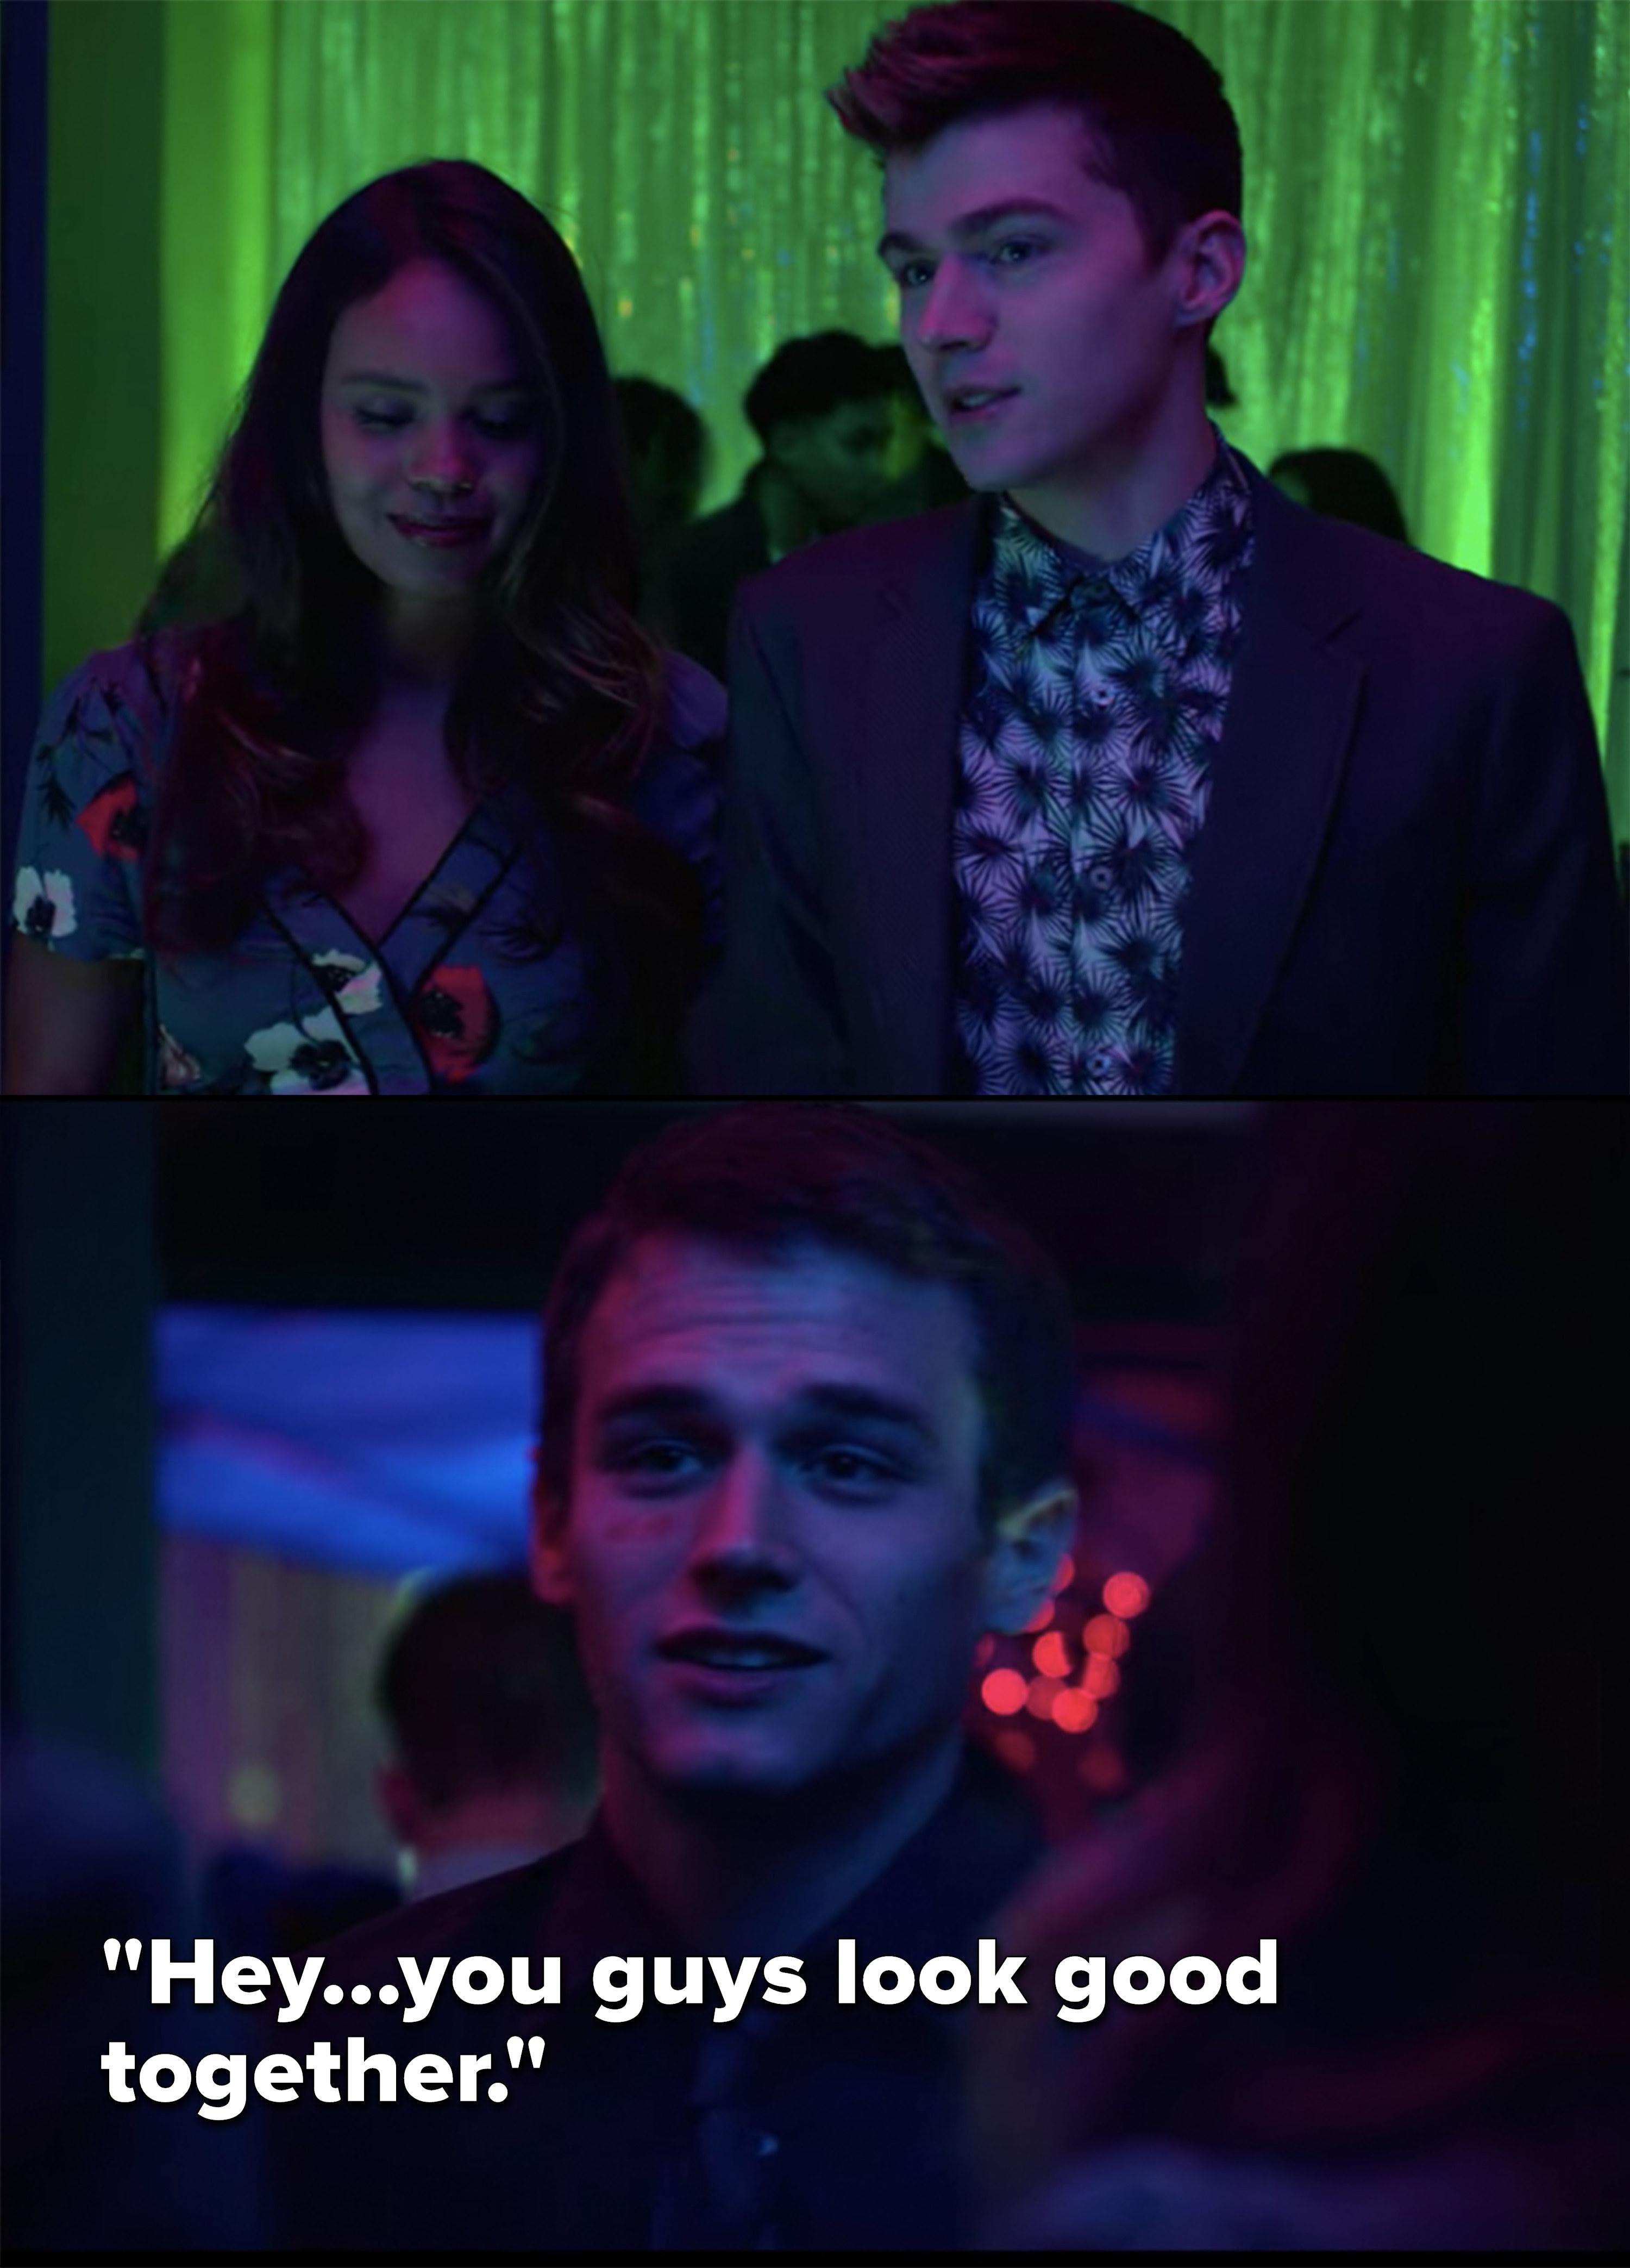 Justin awkwardly greets Jessica and Alex at the dance and says they look good together